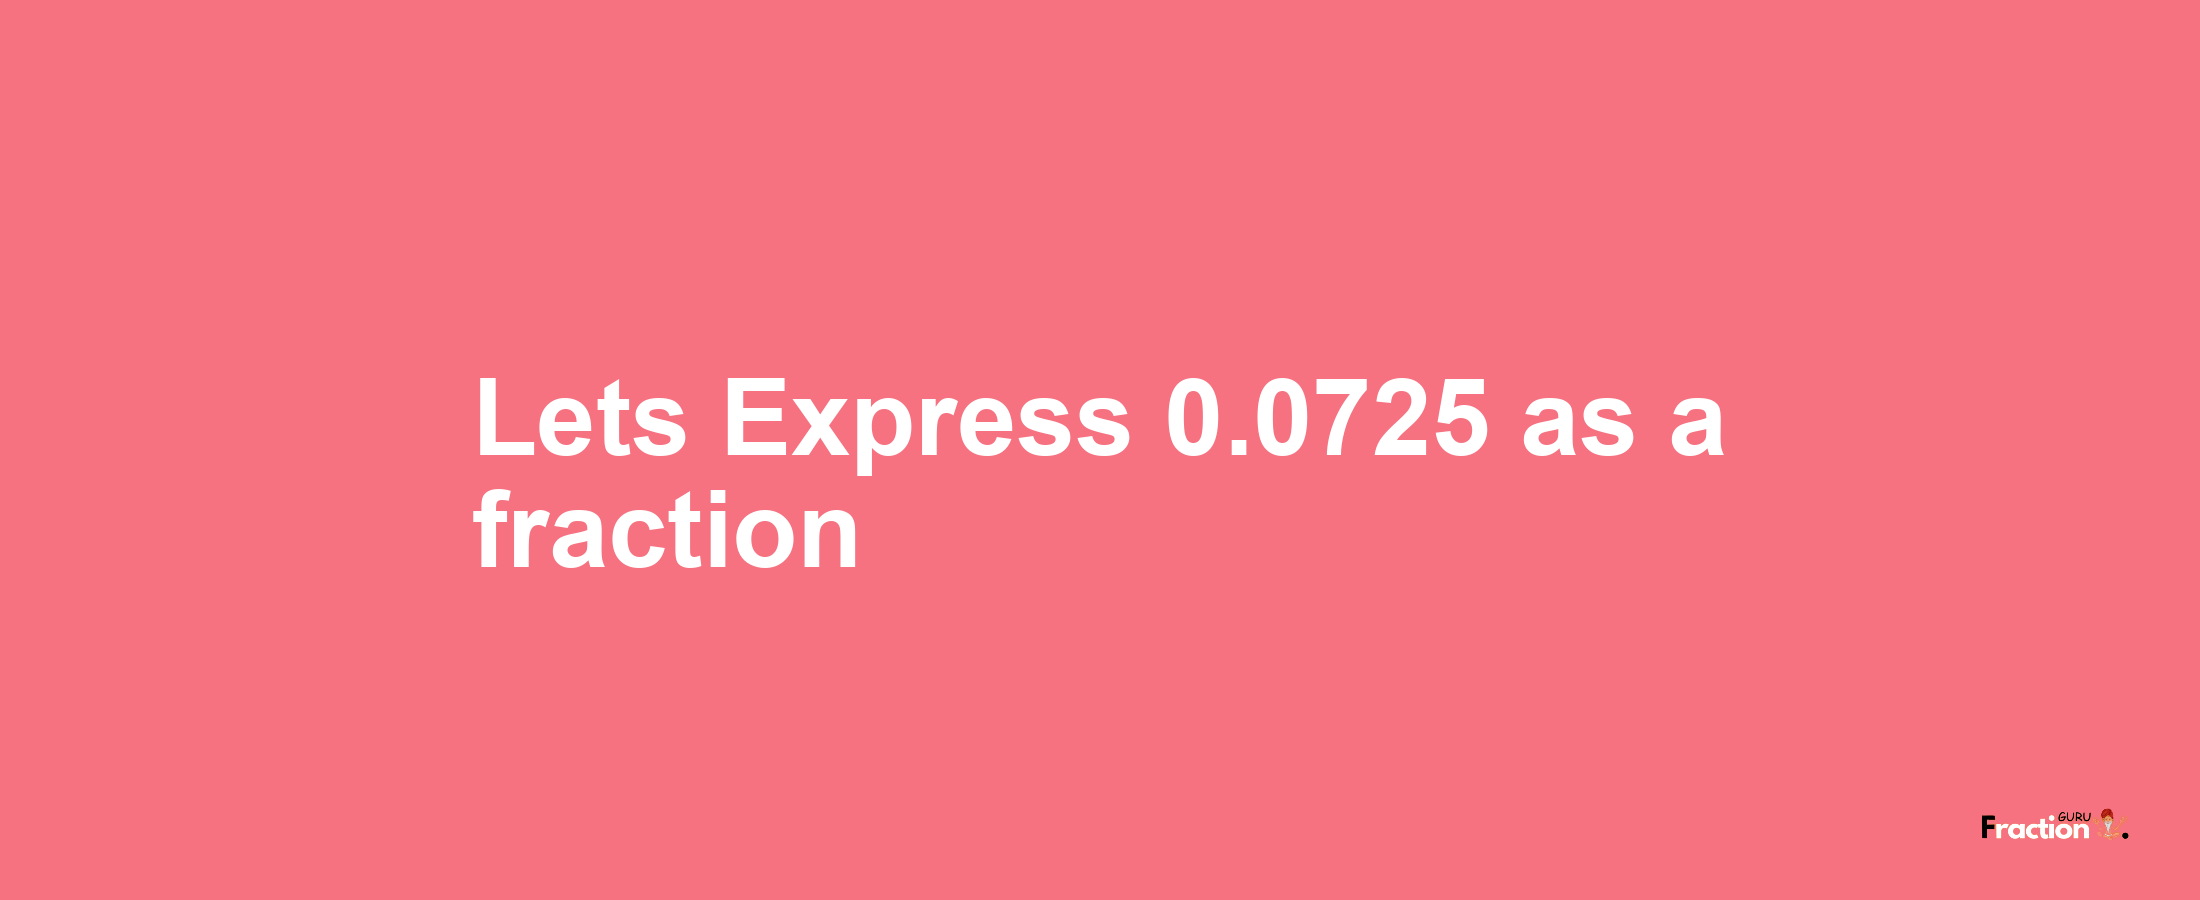 Lets Express 0.0725 as afraction